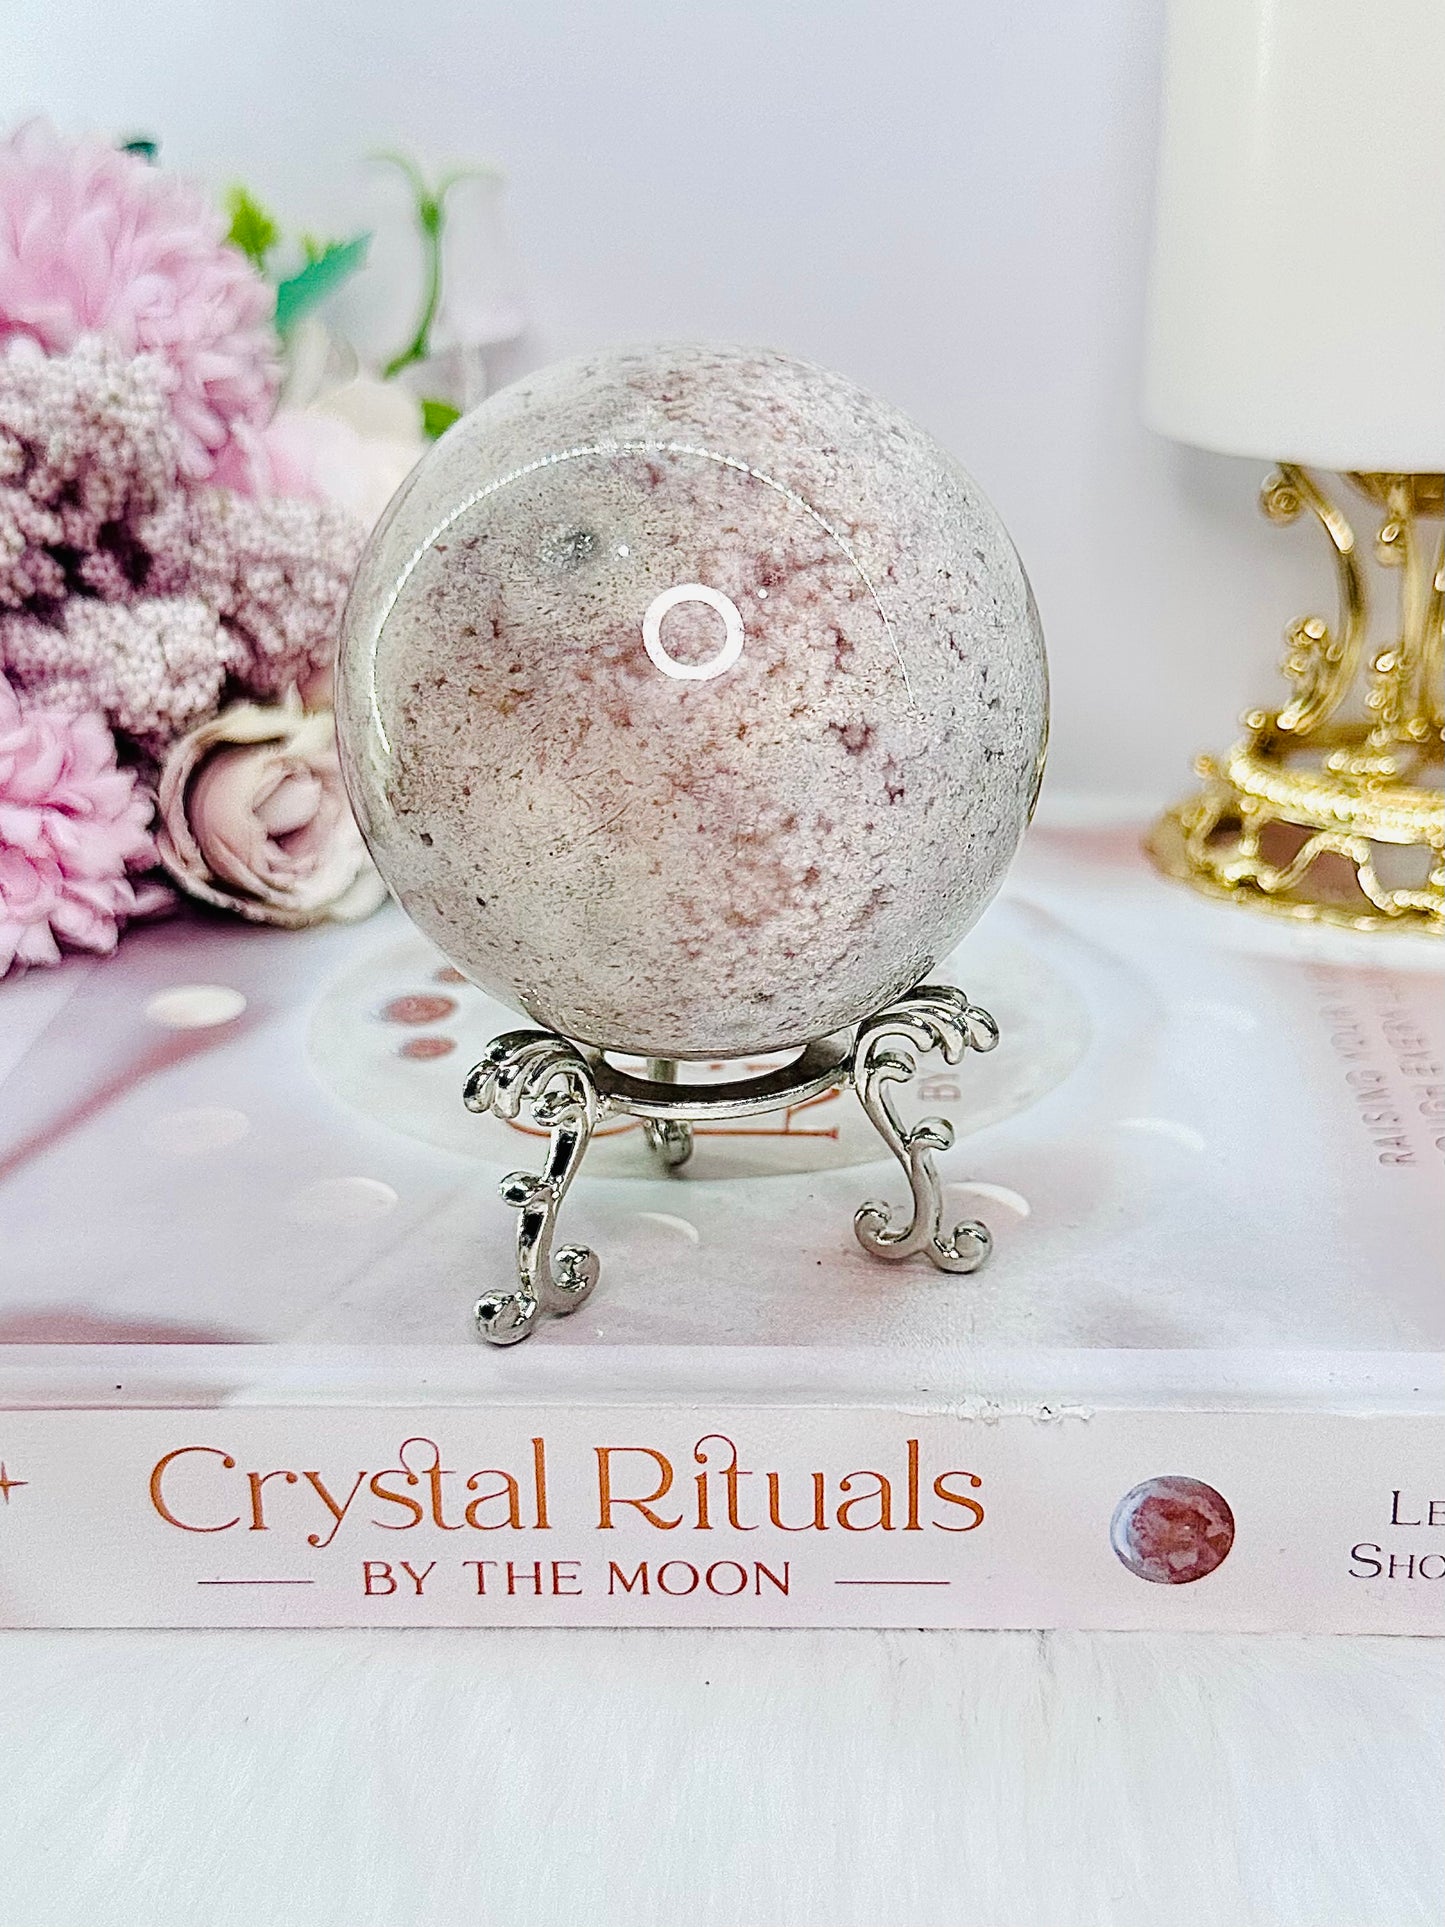 Simply Elegant Large Druzy Pink Amethyst Sphere 401gram On Stand From Brazil